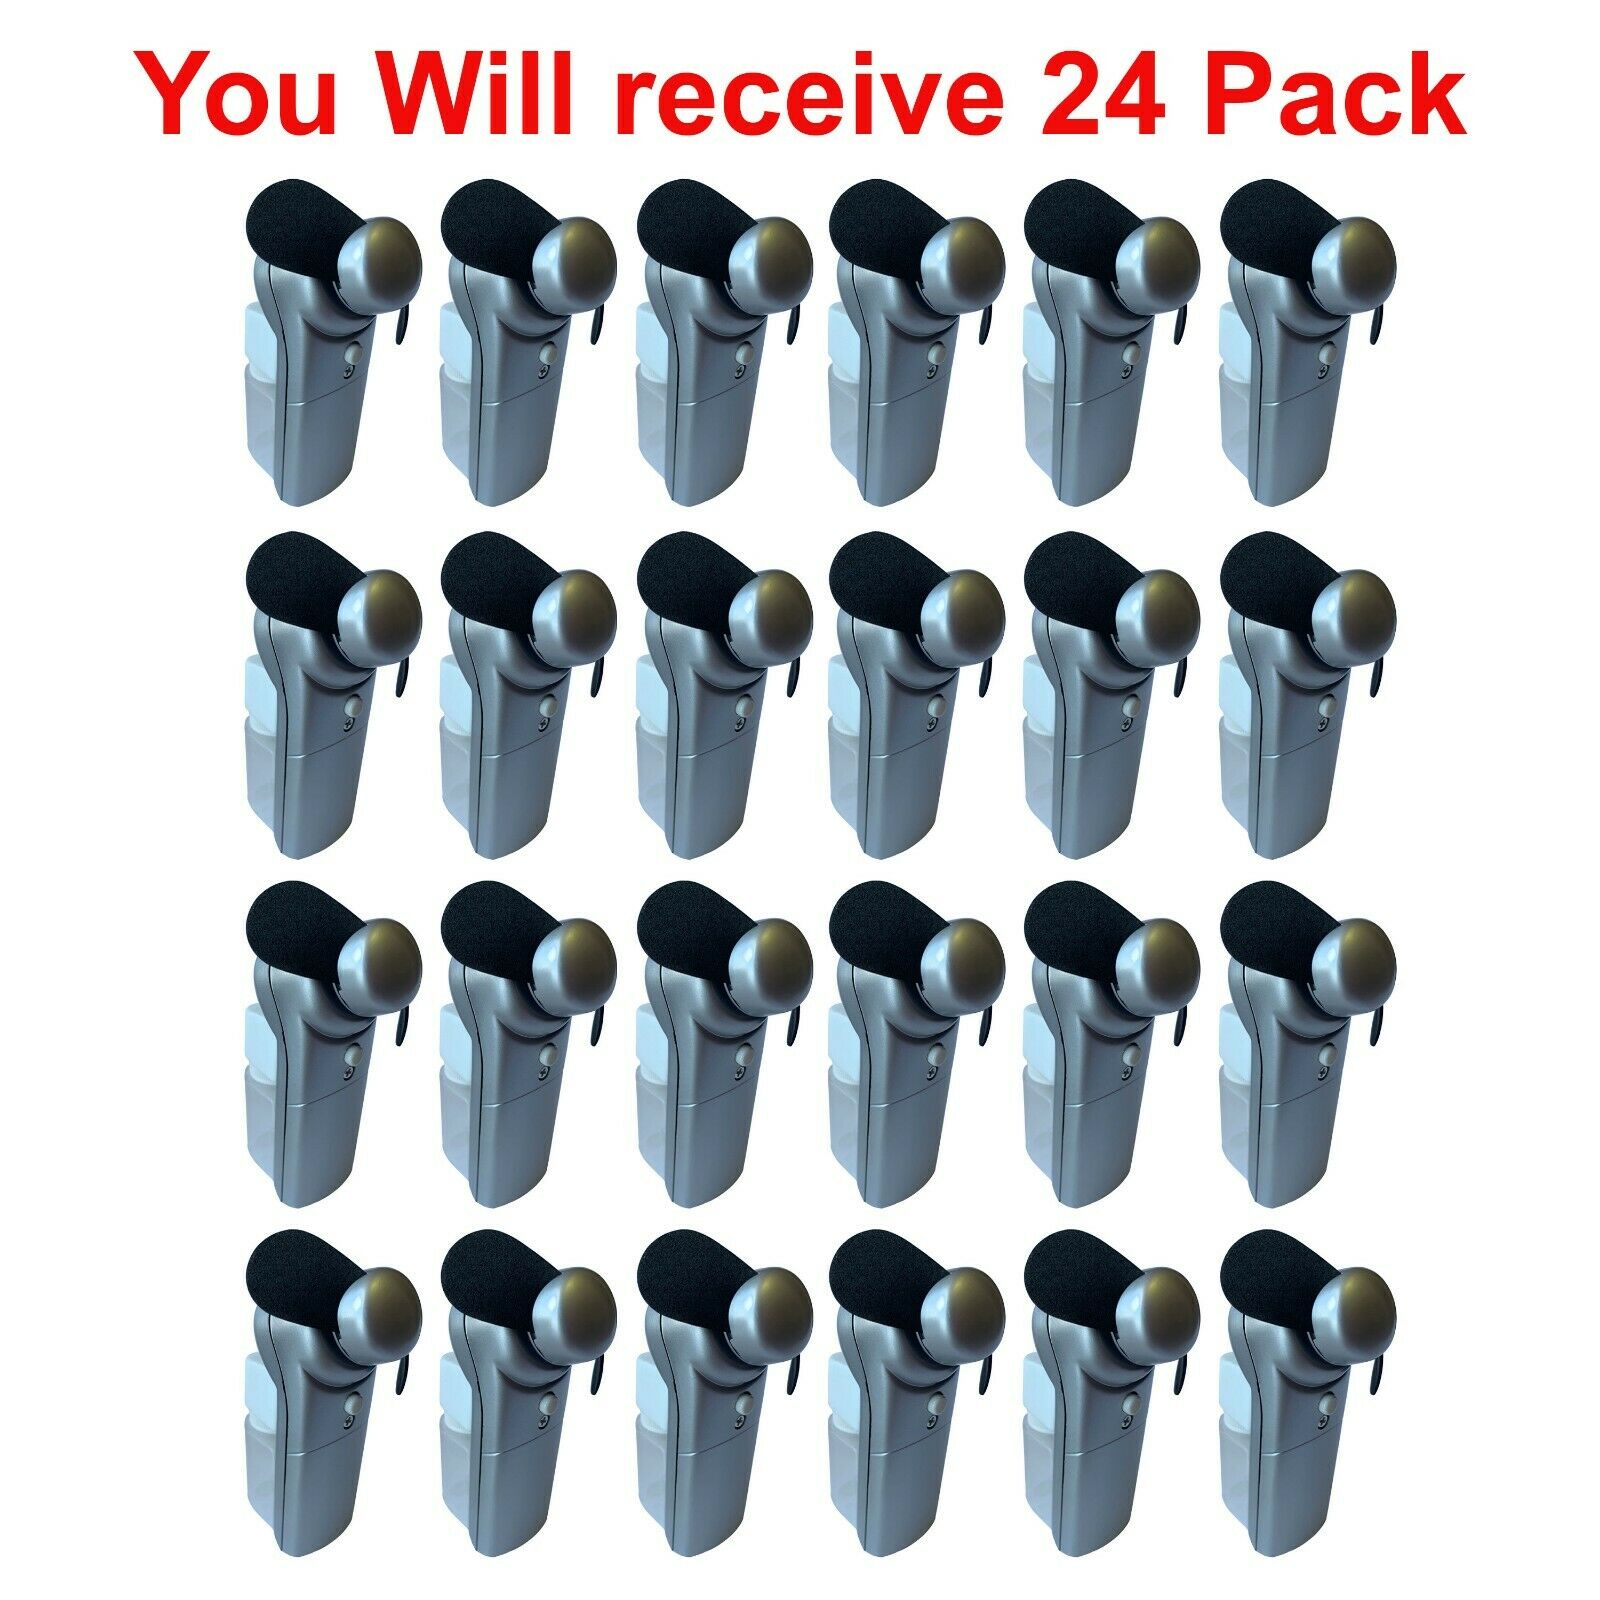 24x Portable Misting Fan Mini Pocket Handheld Cooling Personal Water Spray